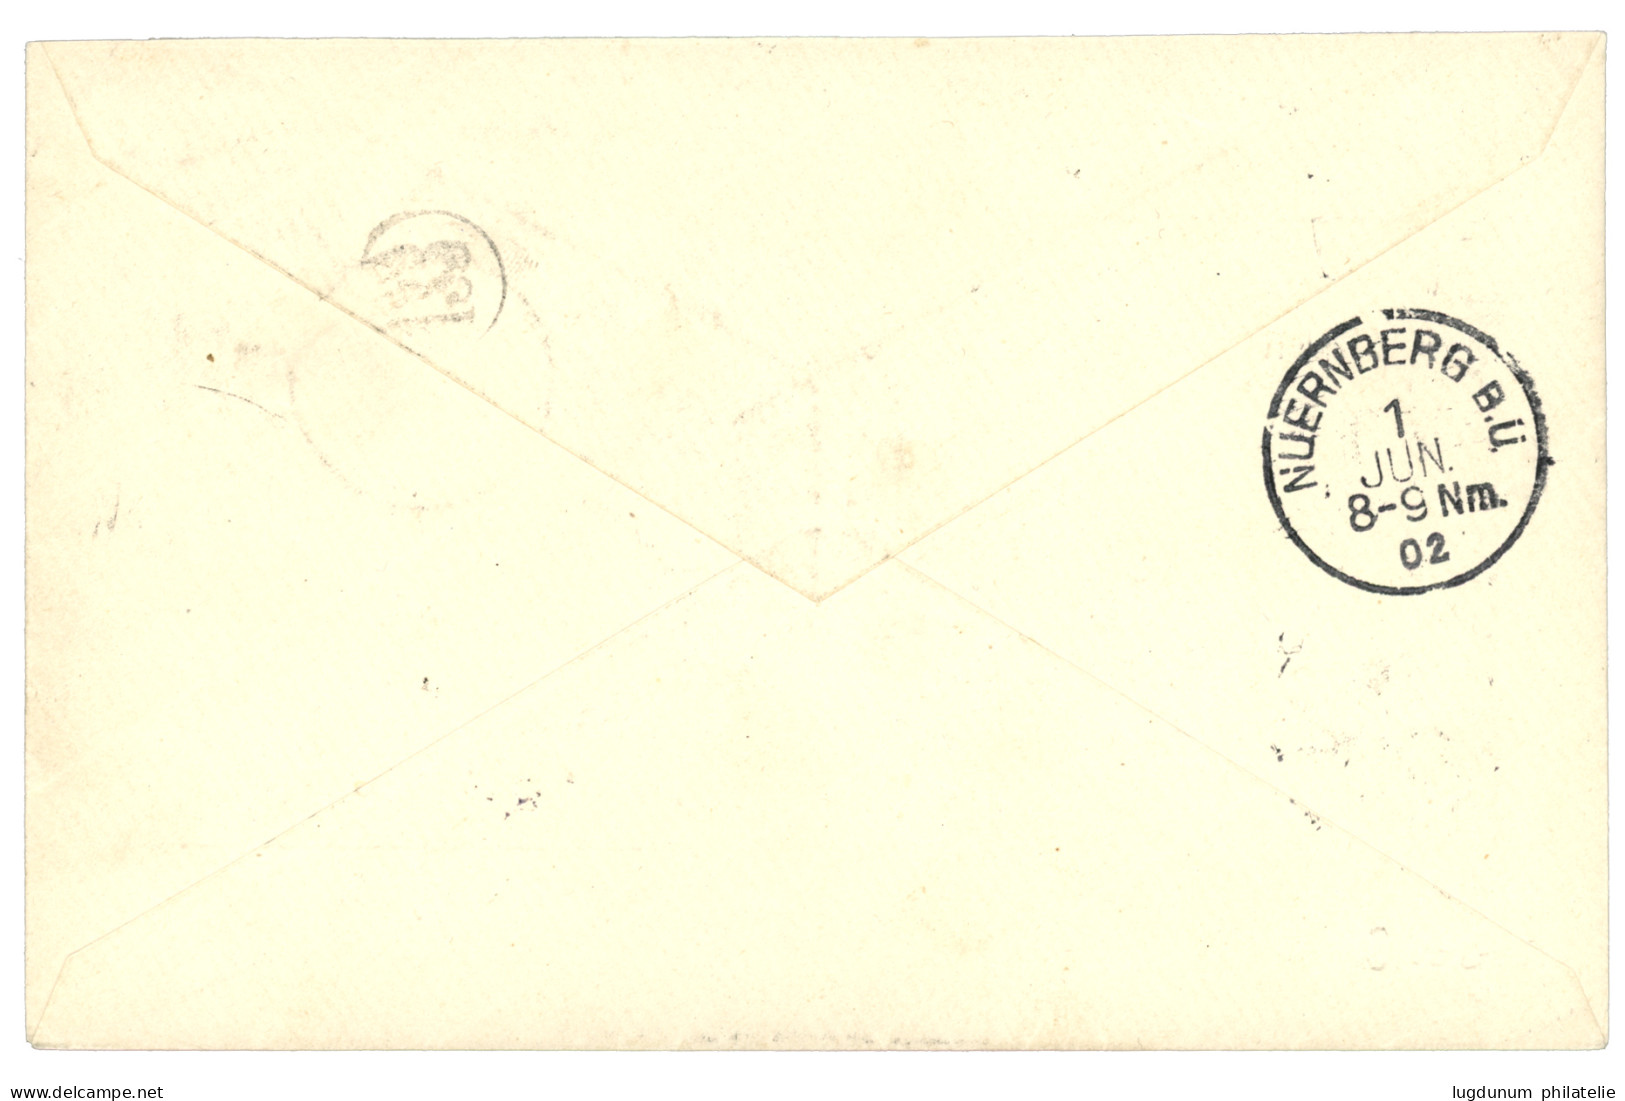 GERMAN SOUTH WEST AFRICA : 1902 40pf Block Of 4 Canc. OMARURU On REGISTERED Envelope To GERMANY. Vvf. - Sud-Ouest Africain Allemand